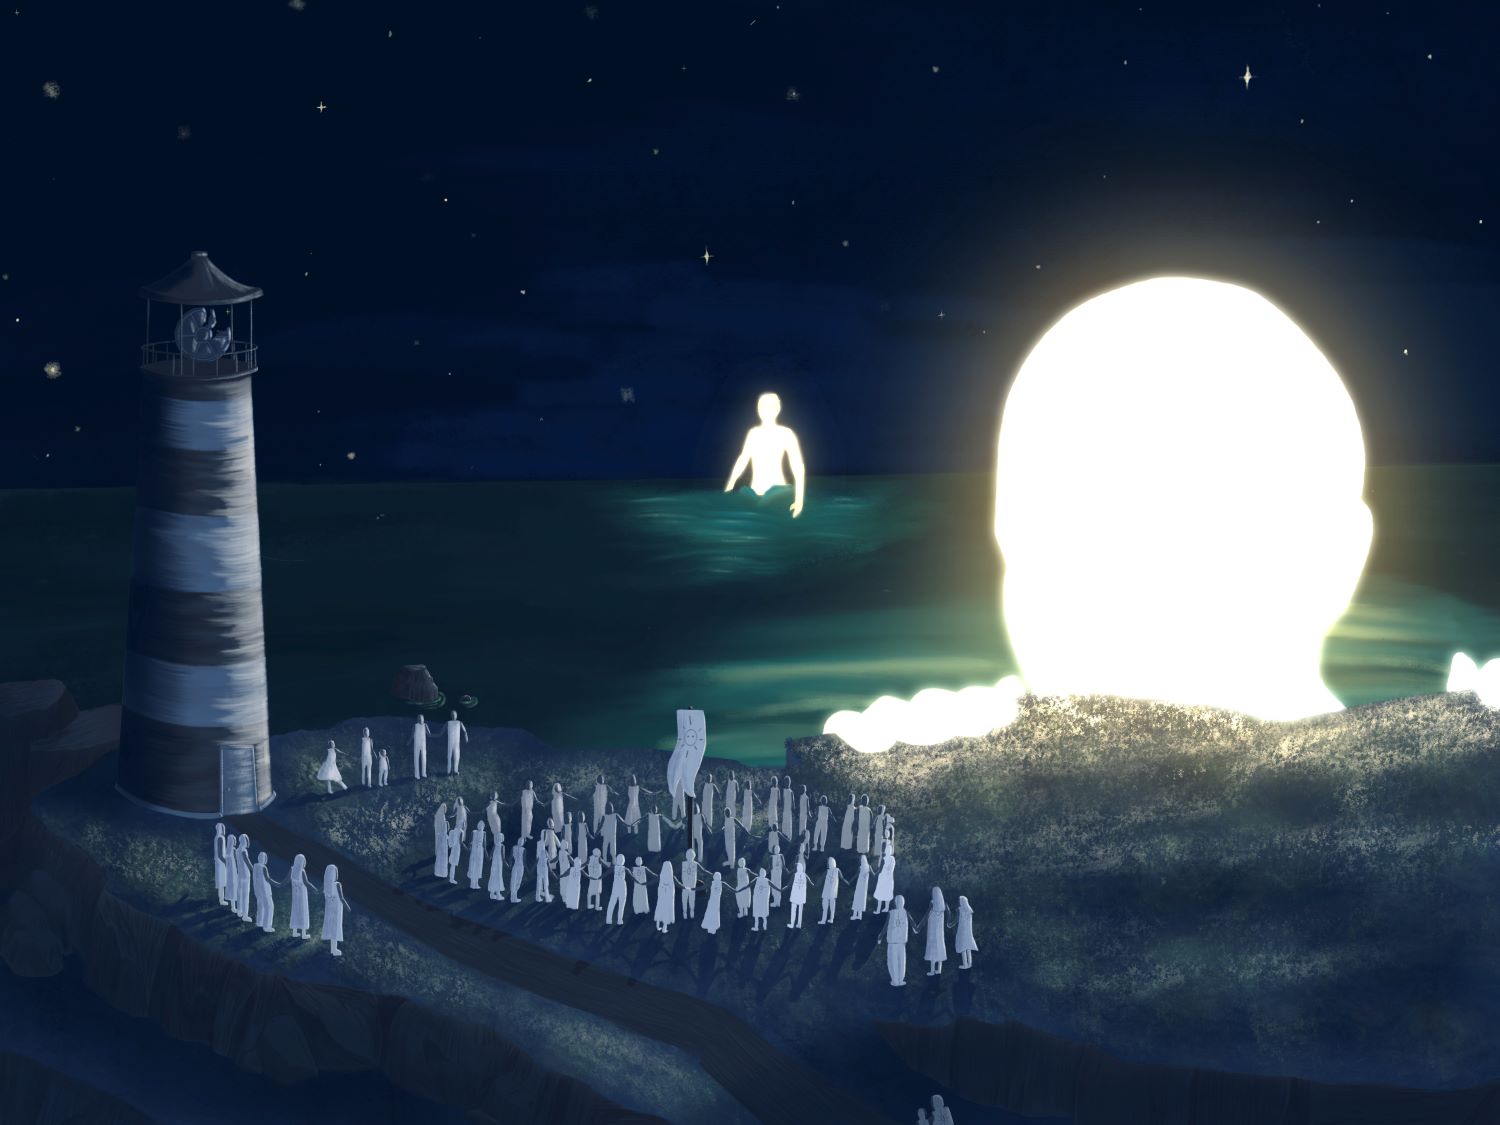 Cult ritual on a cliff with a lighthouse by the ocean with two giant glowing beings, one of which is in the distance